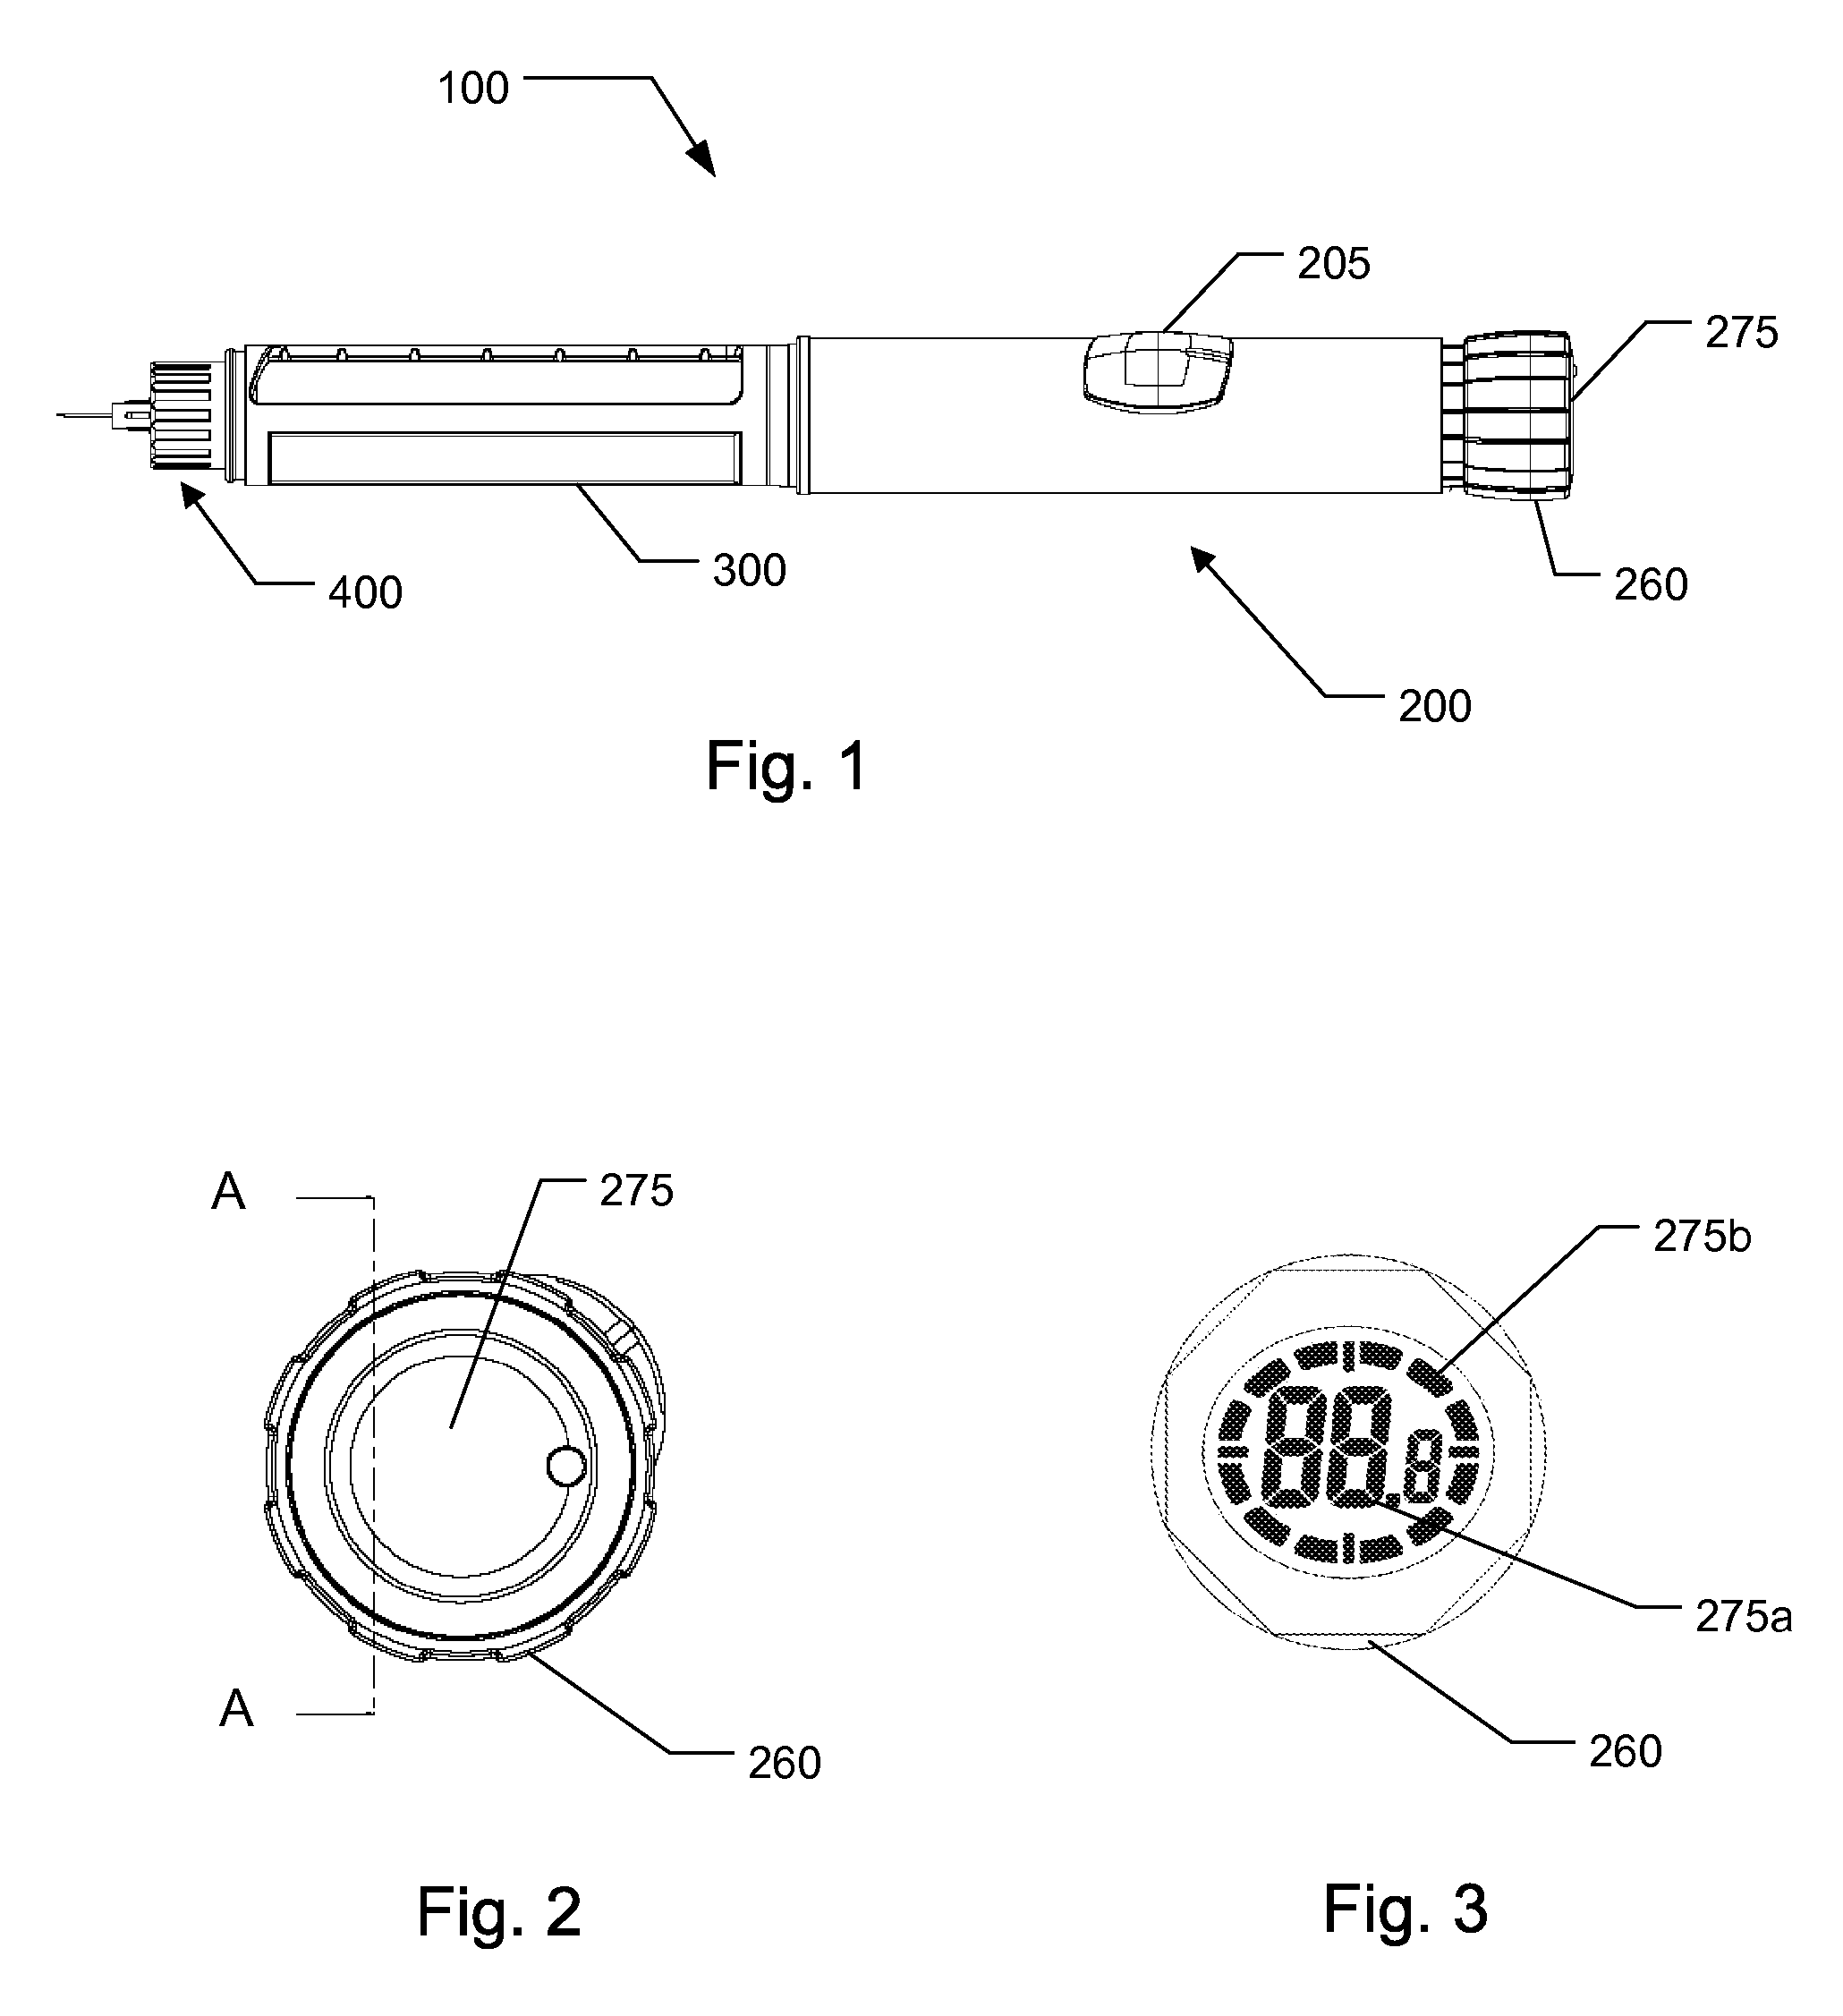 Electronically assisted drug delivery device